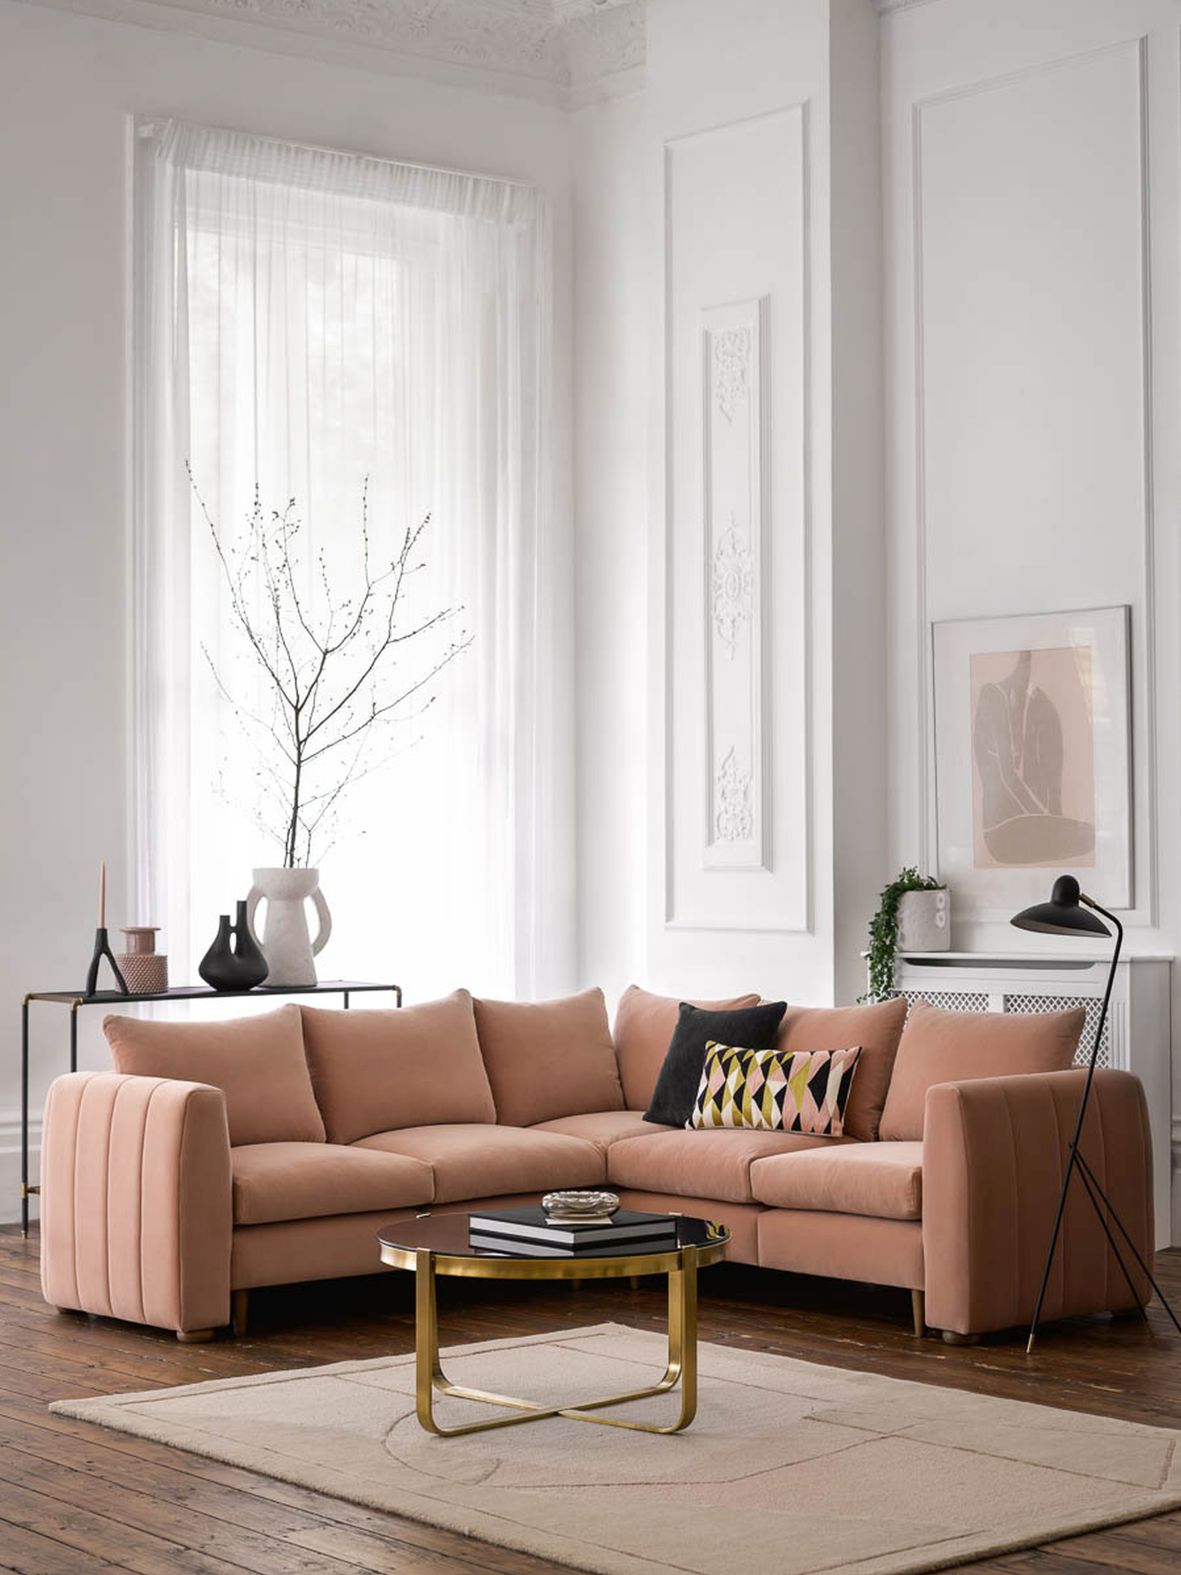 art deco furniture, Sofa.com Introduces a New Collection Inspired by Modern Renaissance